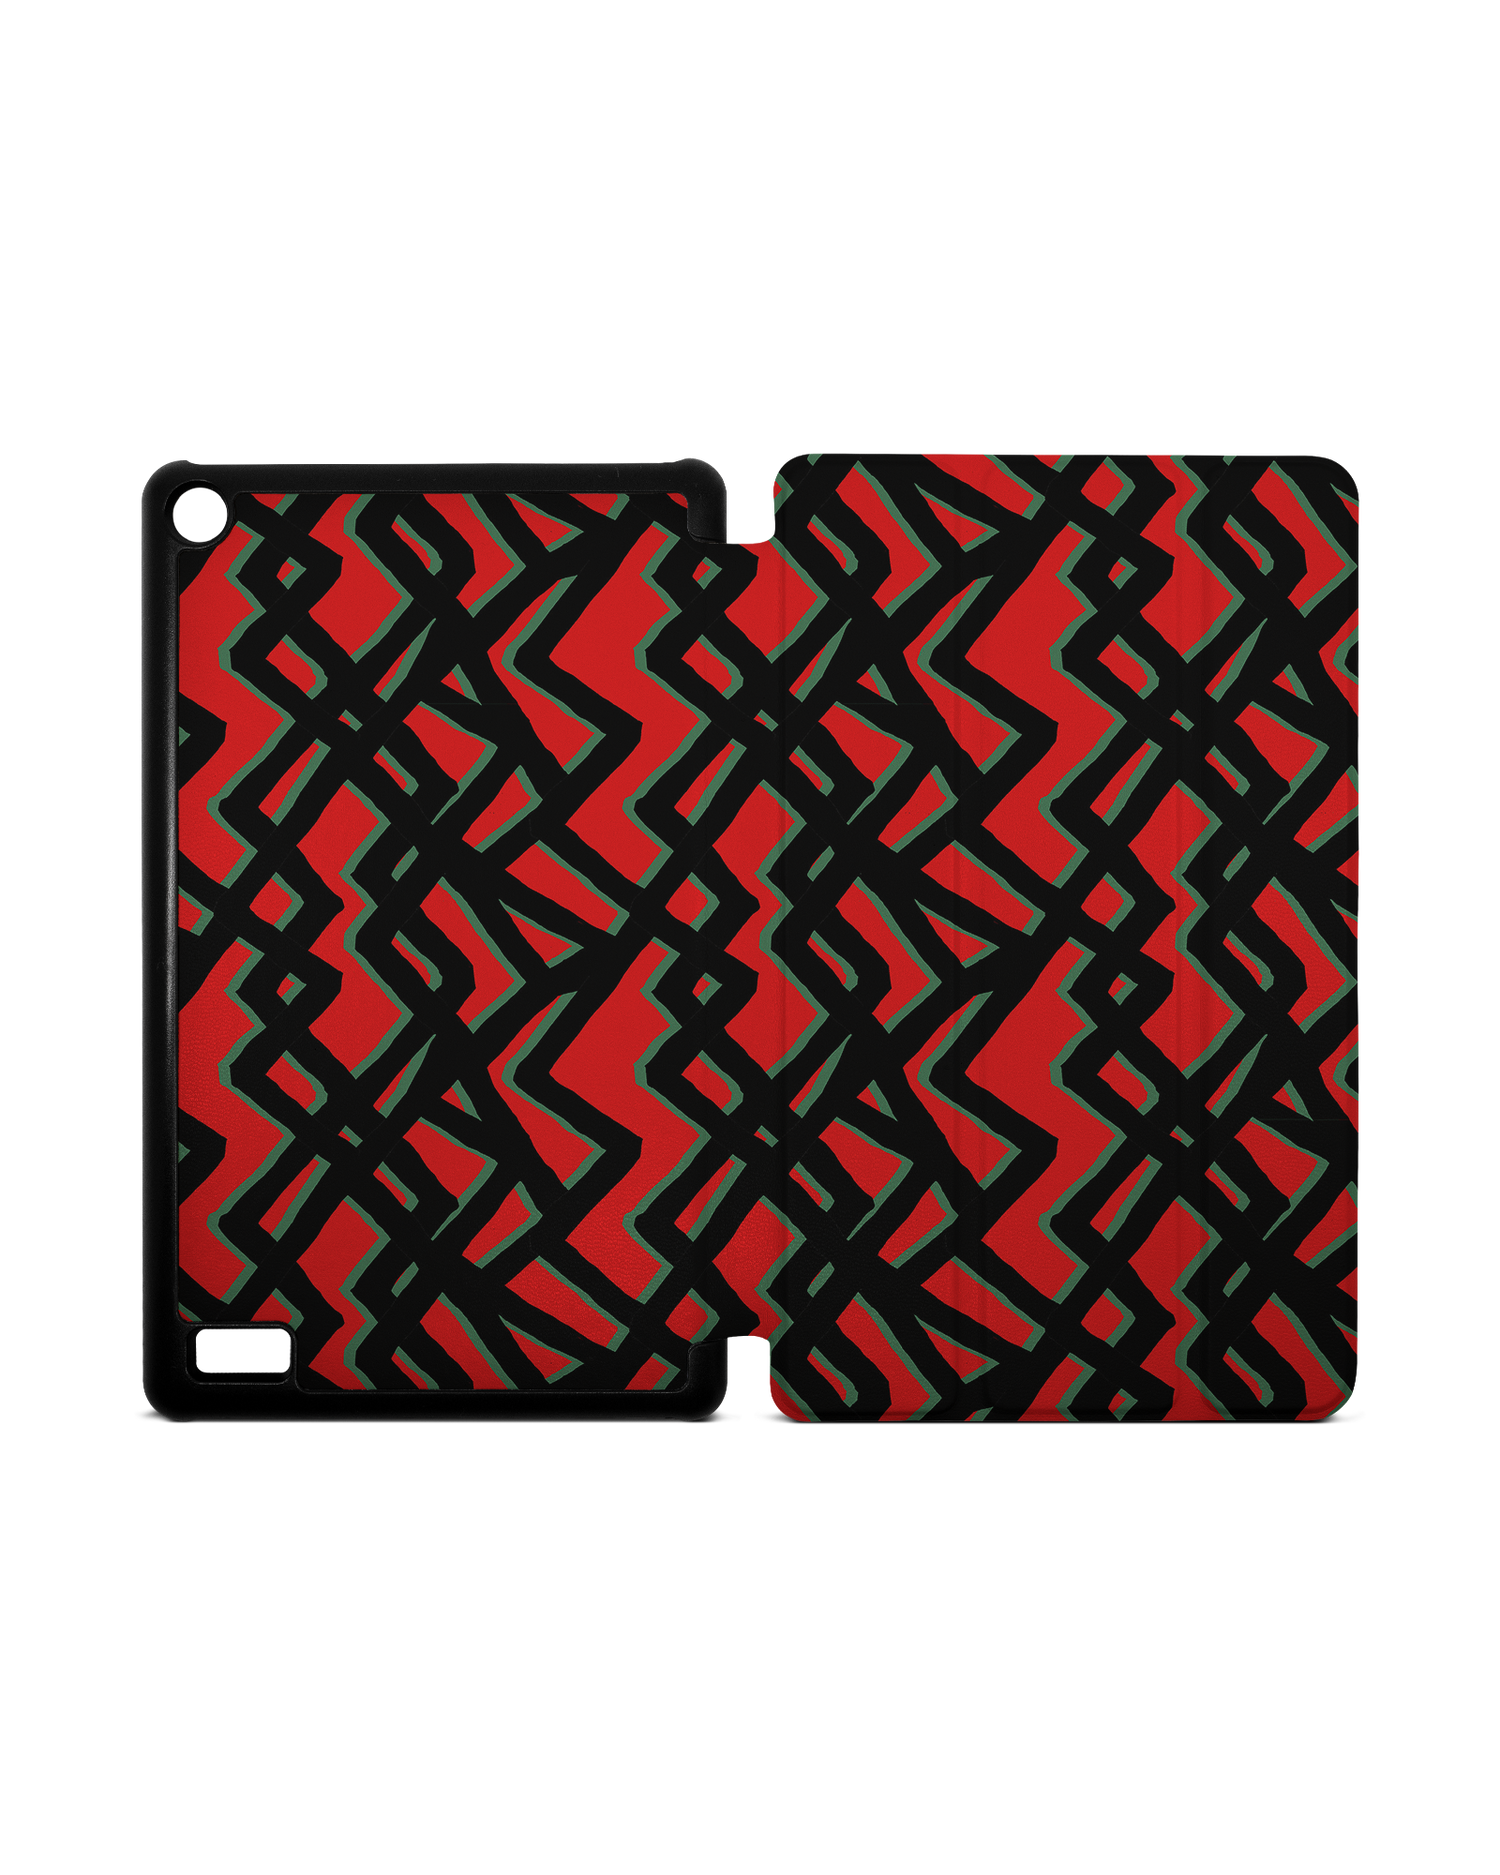 Fences Pattern Tablet Smart Case for Amazon Fire 7: Opened